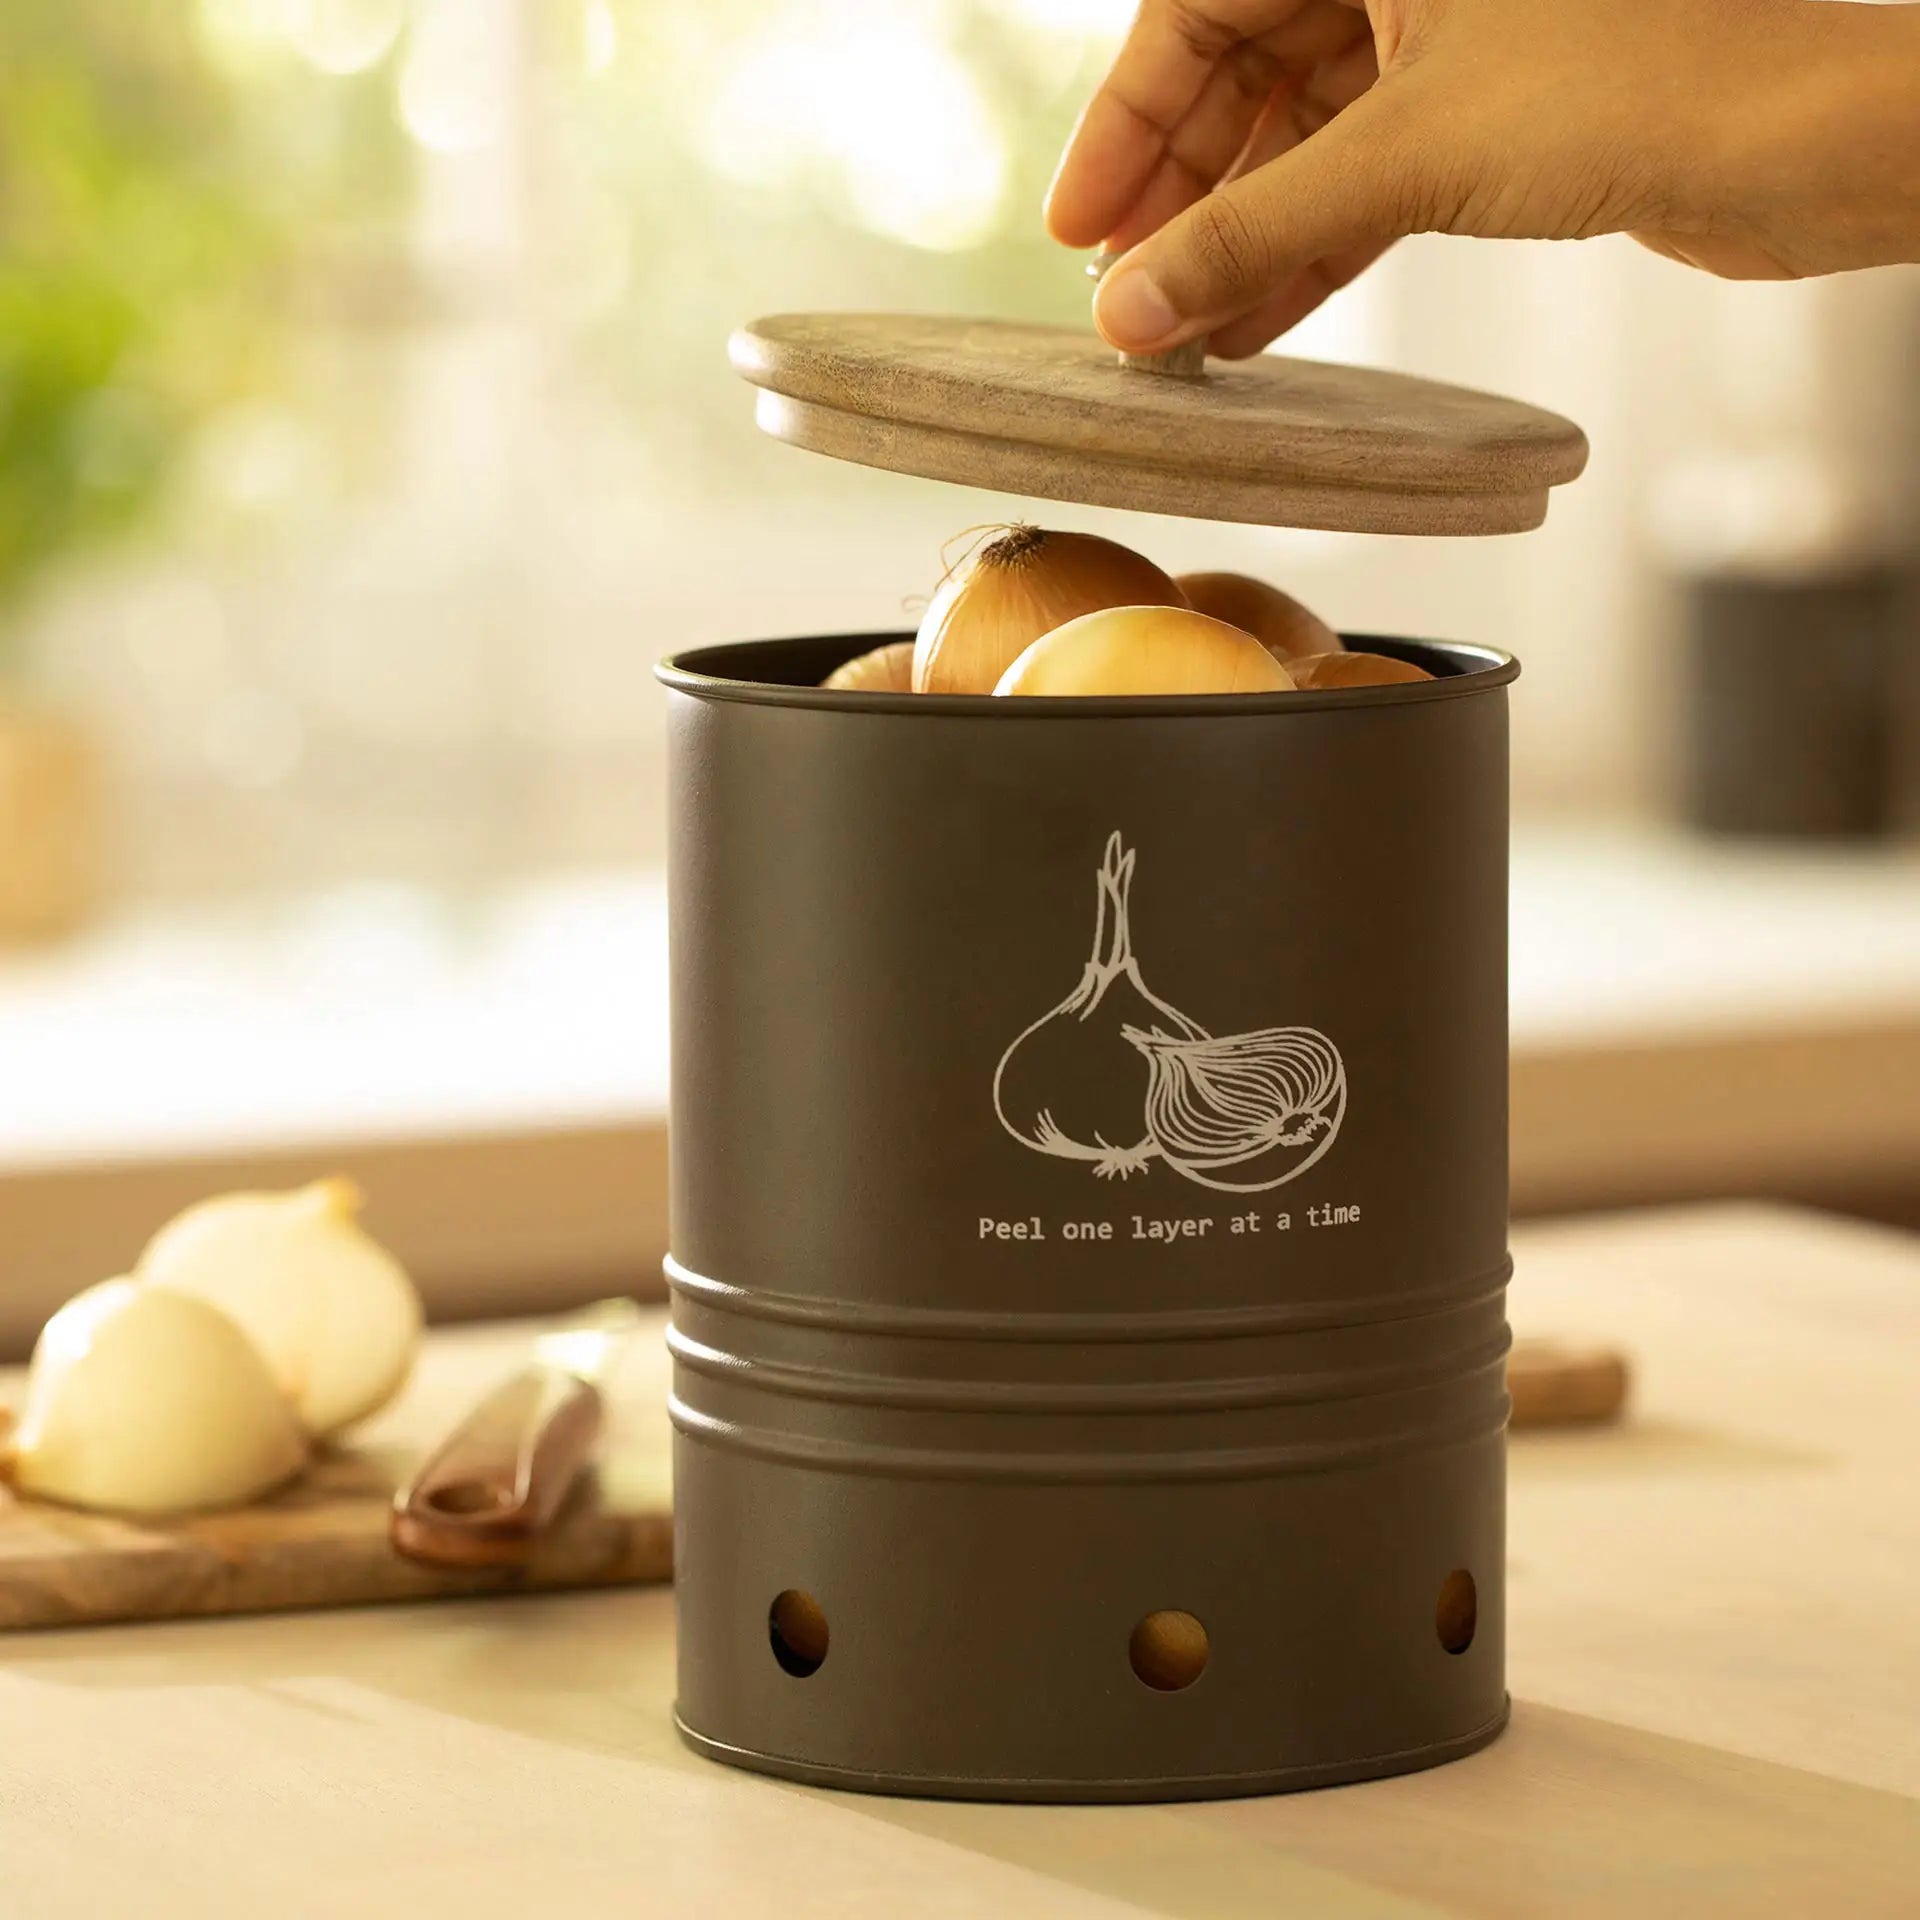 Charcoal Brown Onion Storage Bin with Wooden Lid